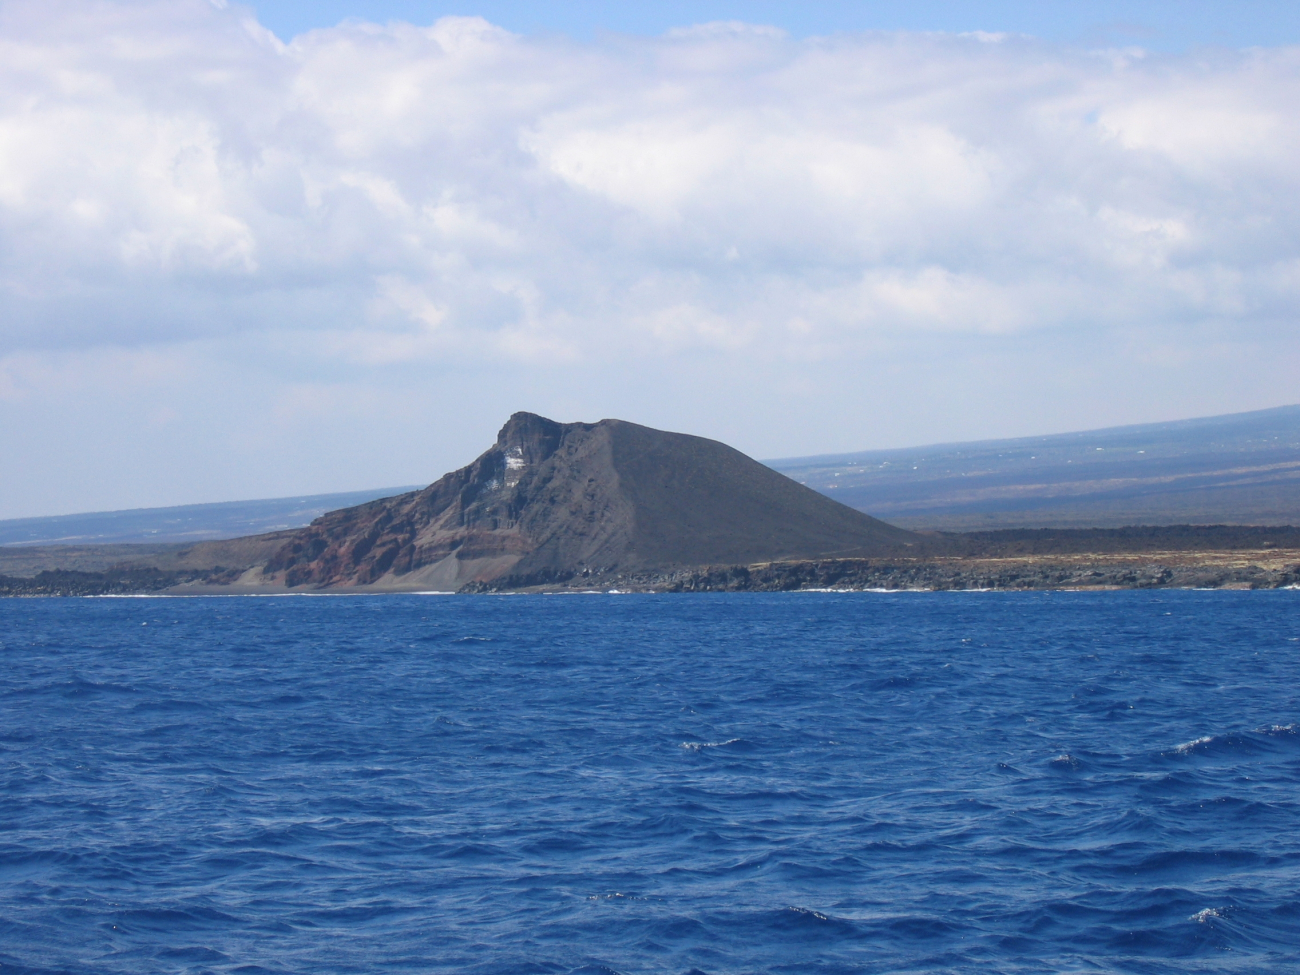 An eroded volcanic cone